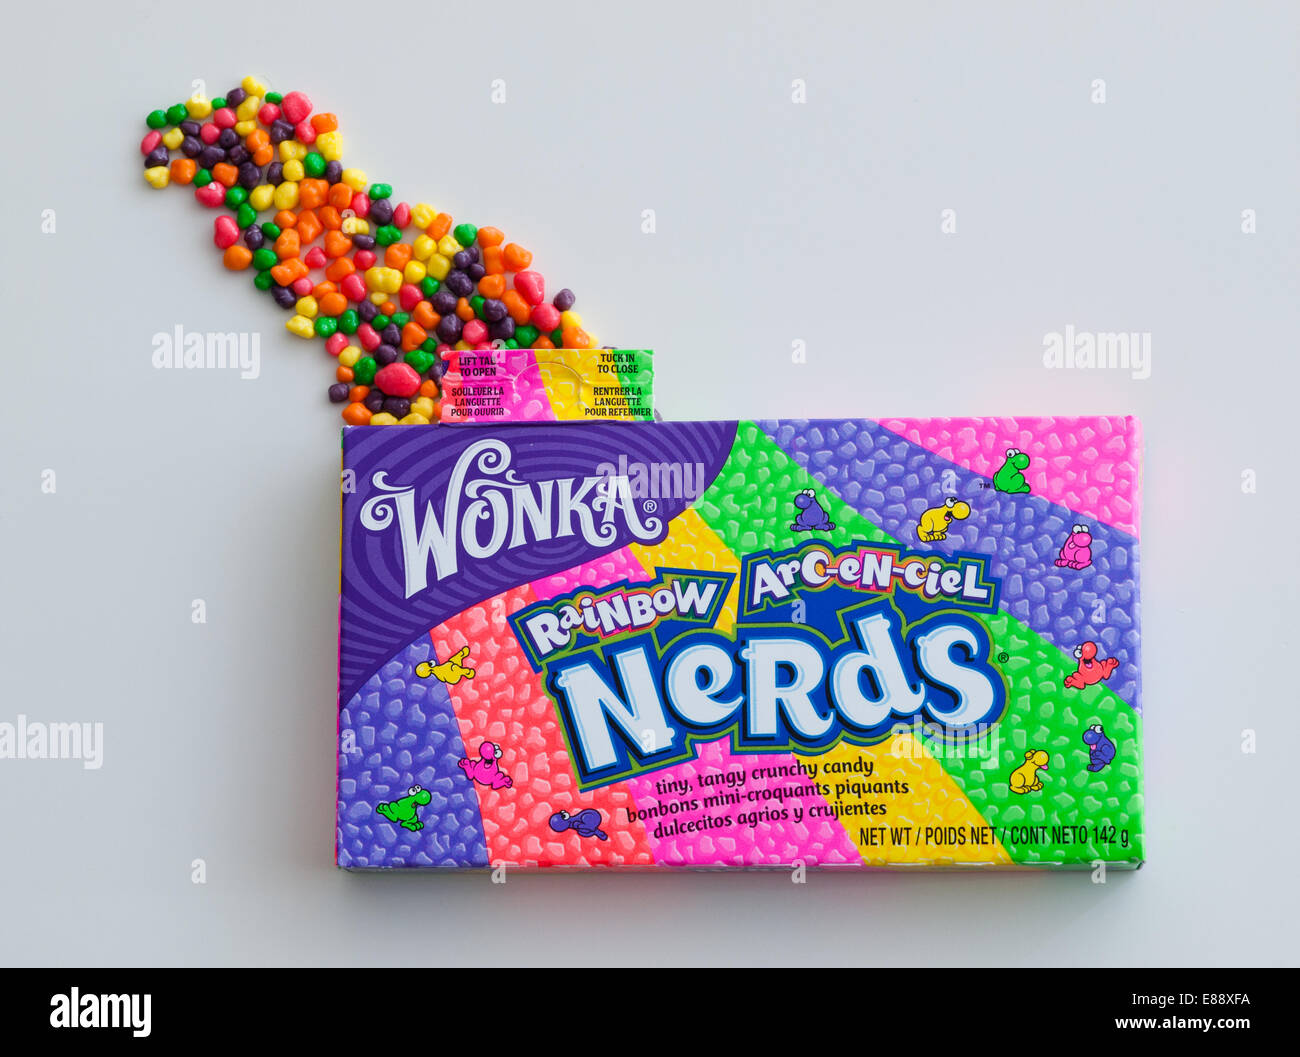 https://c8.alamy.com/comp/E88XFA/a-box-of-rainbow-nerds-candy-currently-sold-by-nestl-under-their-willy-E88XFA.jpg